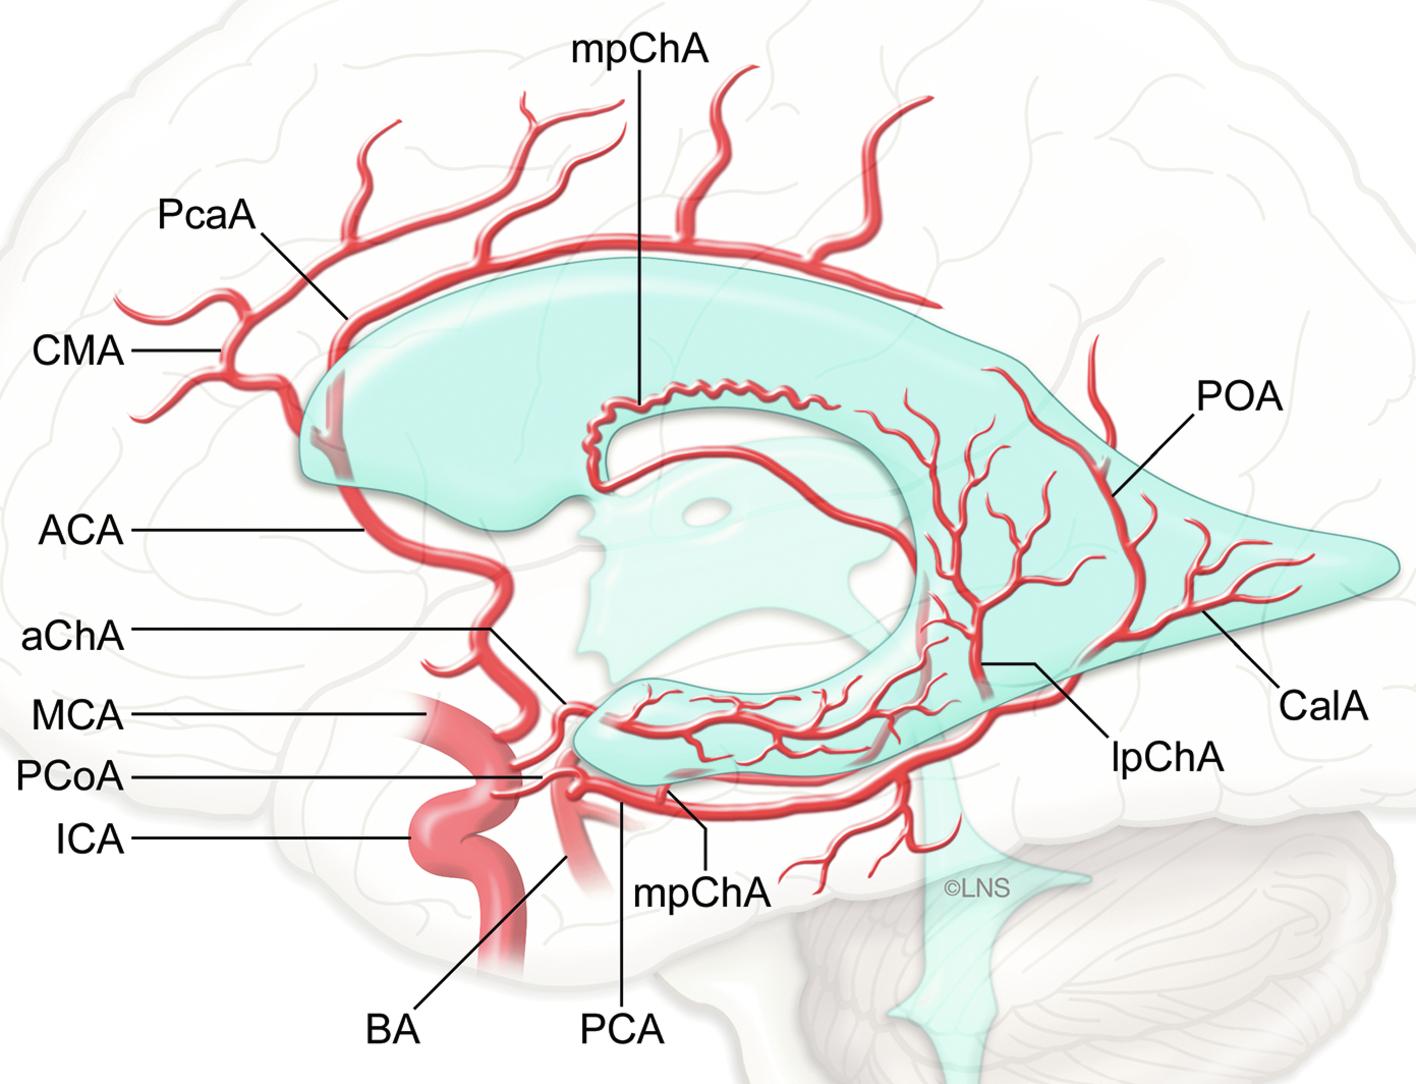 Fig. 33.2, Arterial anatomy of the periventricular region. The lateral ventricles are supplied by three choroidal arteries (the anterior choroidal artery [aChA] , medial posterior choroidal artery [mpChA] , and lateral posterior choroidal artery [lpChA] ). The aChA arises from the supraclinoid internal carotid artery (ICA) and courses underneath the optic apparatus into the temporal horn. The mpChA arises from the crural segment of P 2 (P 2 A) and wraps posteriorly around the tectum into the velum interpositum, ending in the floor of the body of the lateral ventricle through the foramen of Monro. Lastly, the lpChA arises from the ambient segment of P 2 (P 2 P) and takes a direct course into the atrium. ACA , Anterior cerebral artery; BA , basilar artery; CalA , calcarine artery; CMA , callosomarginal artery; MCA , middle cerebral artery; PCA , posterior cerebral artery; PcaA , pericallosal artery; PCoA , posterior communicating artery; POA , parieto-occipital artery.